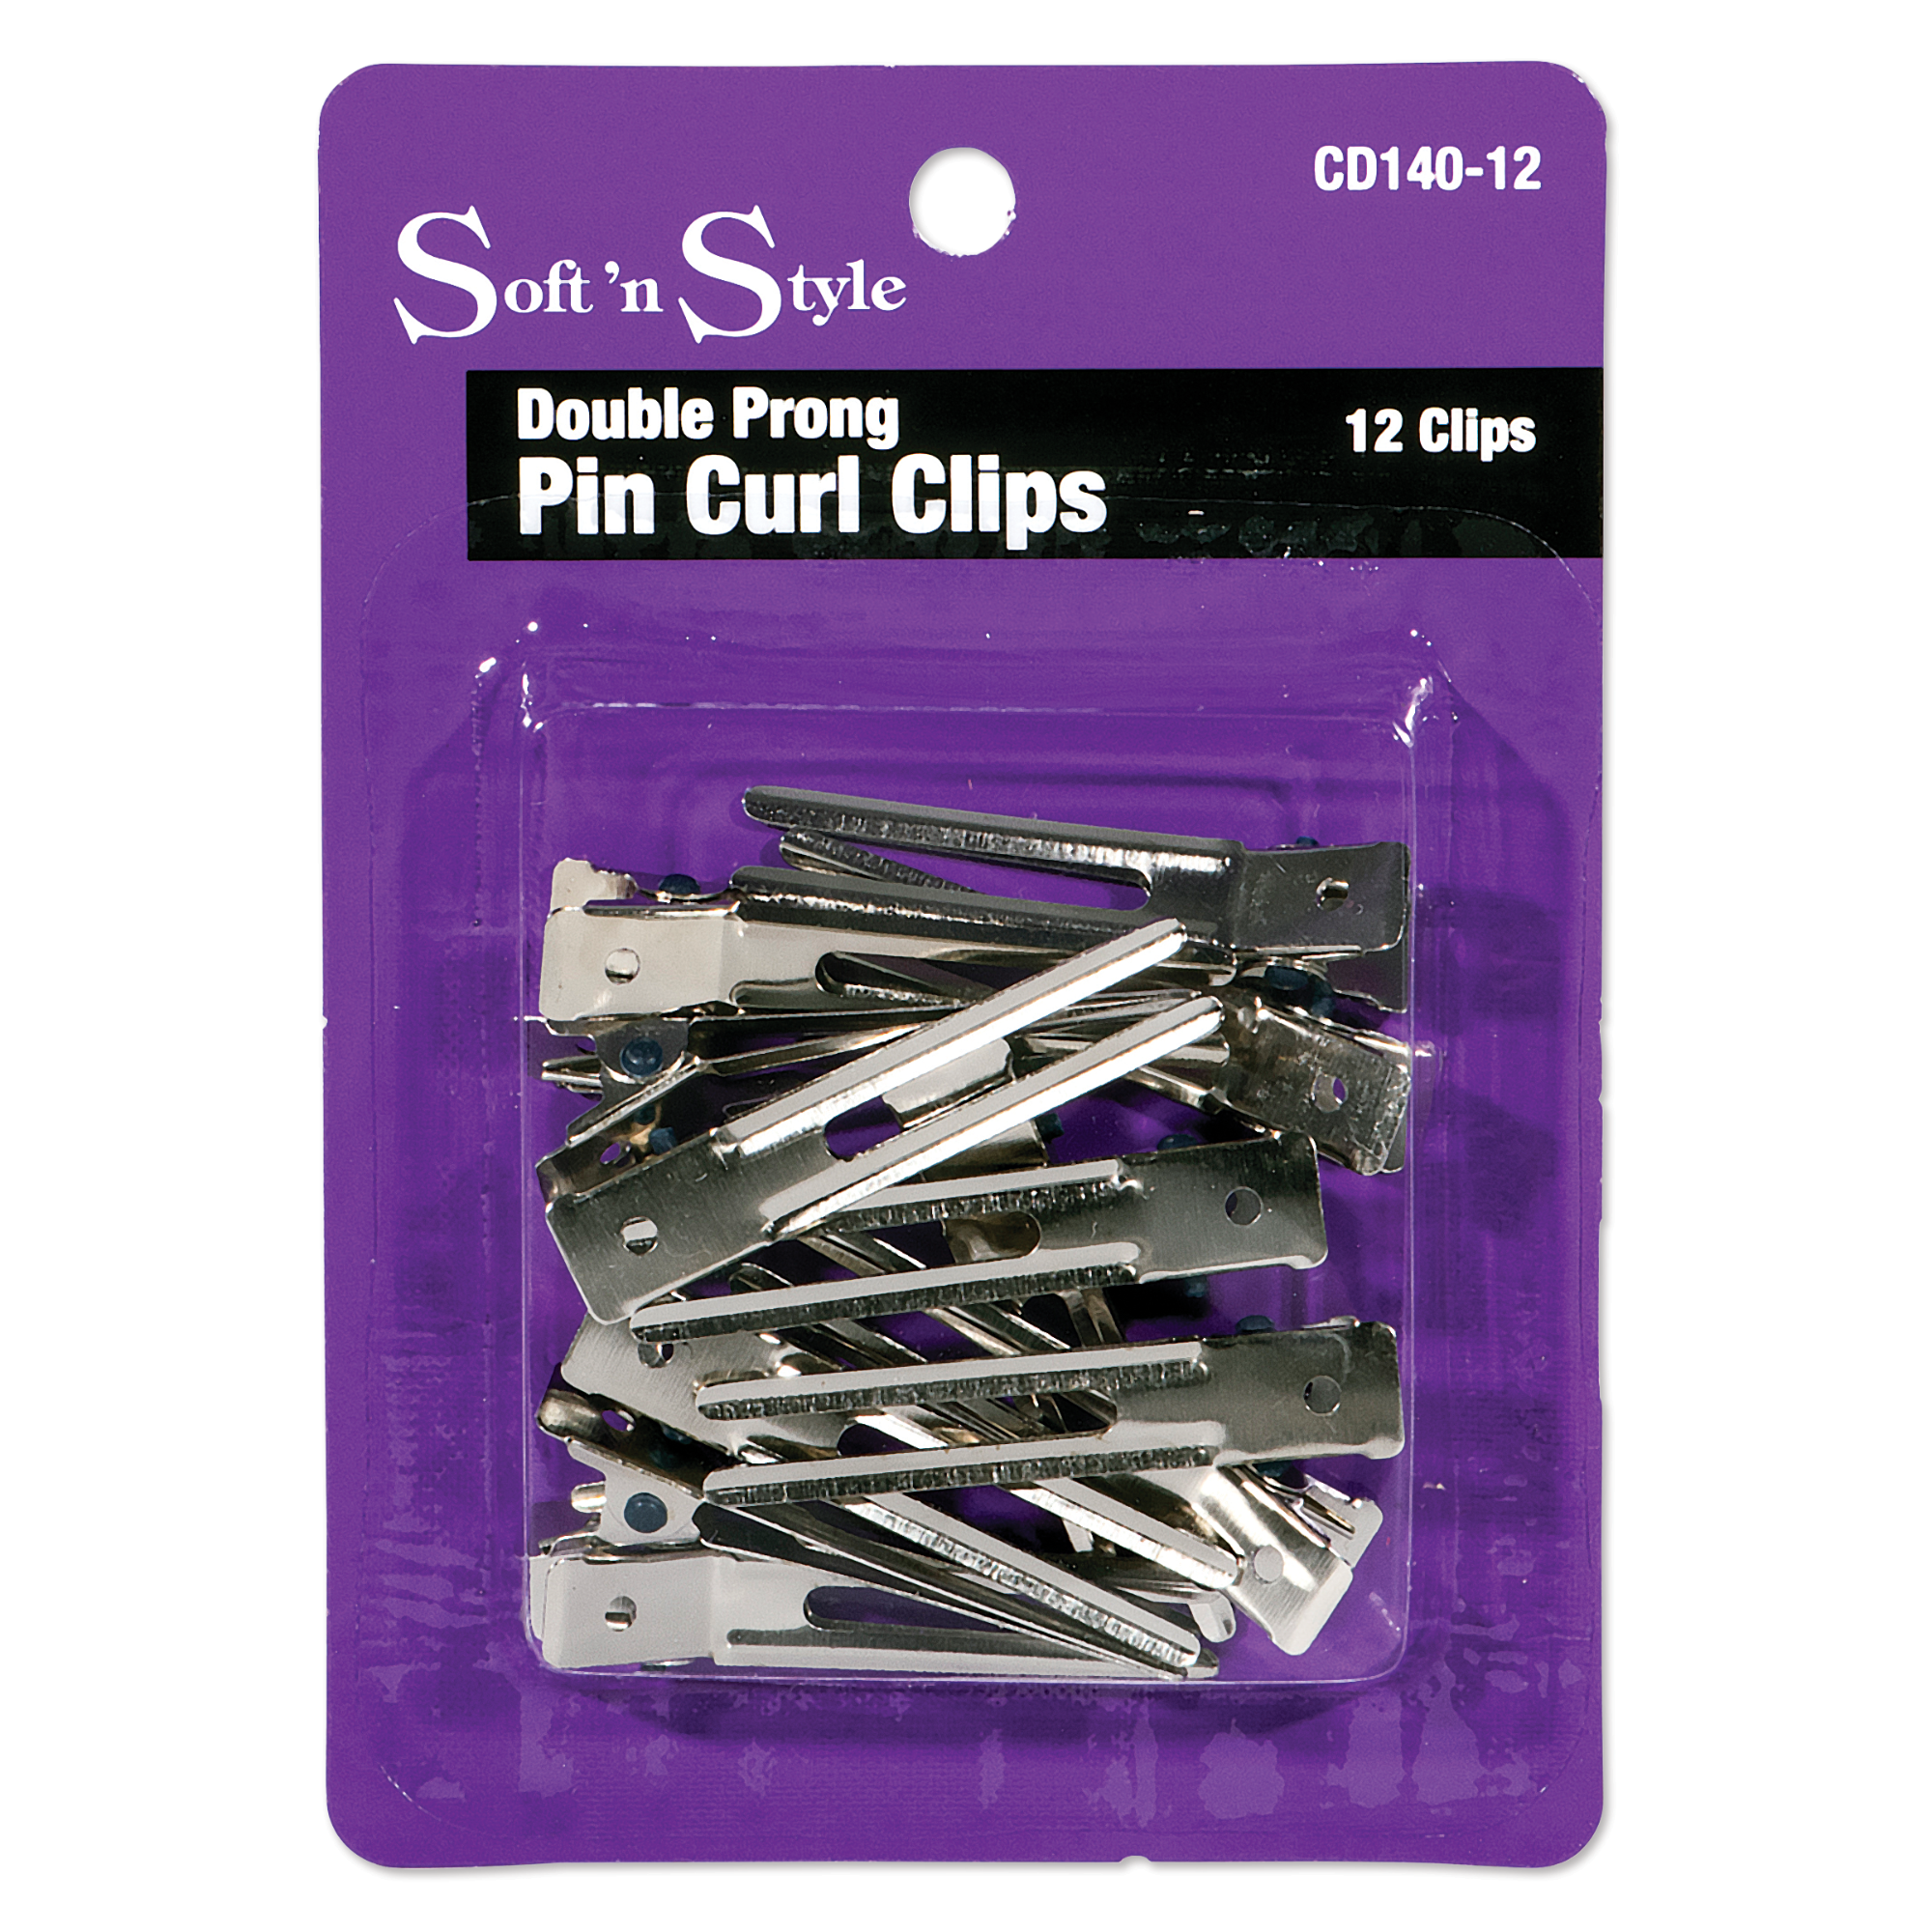 Double Prong Pin Curl Clips, 12 per card